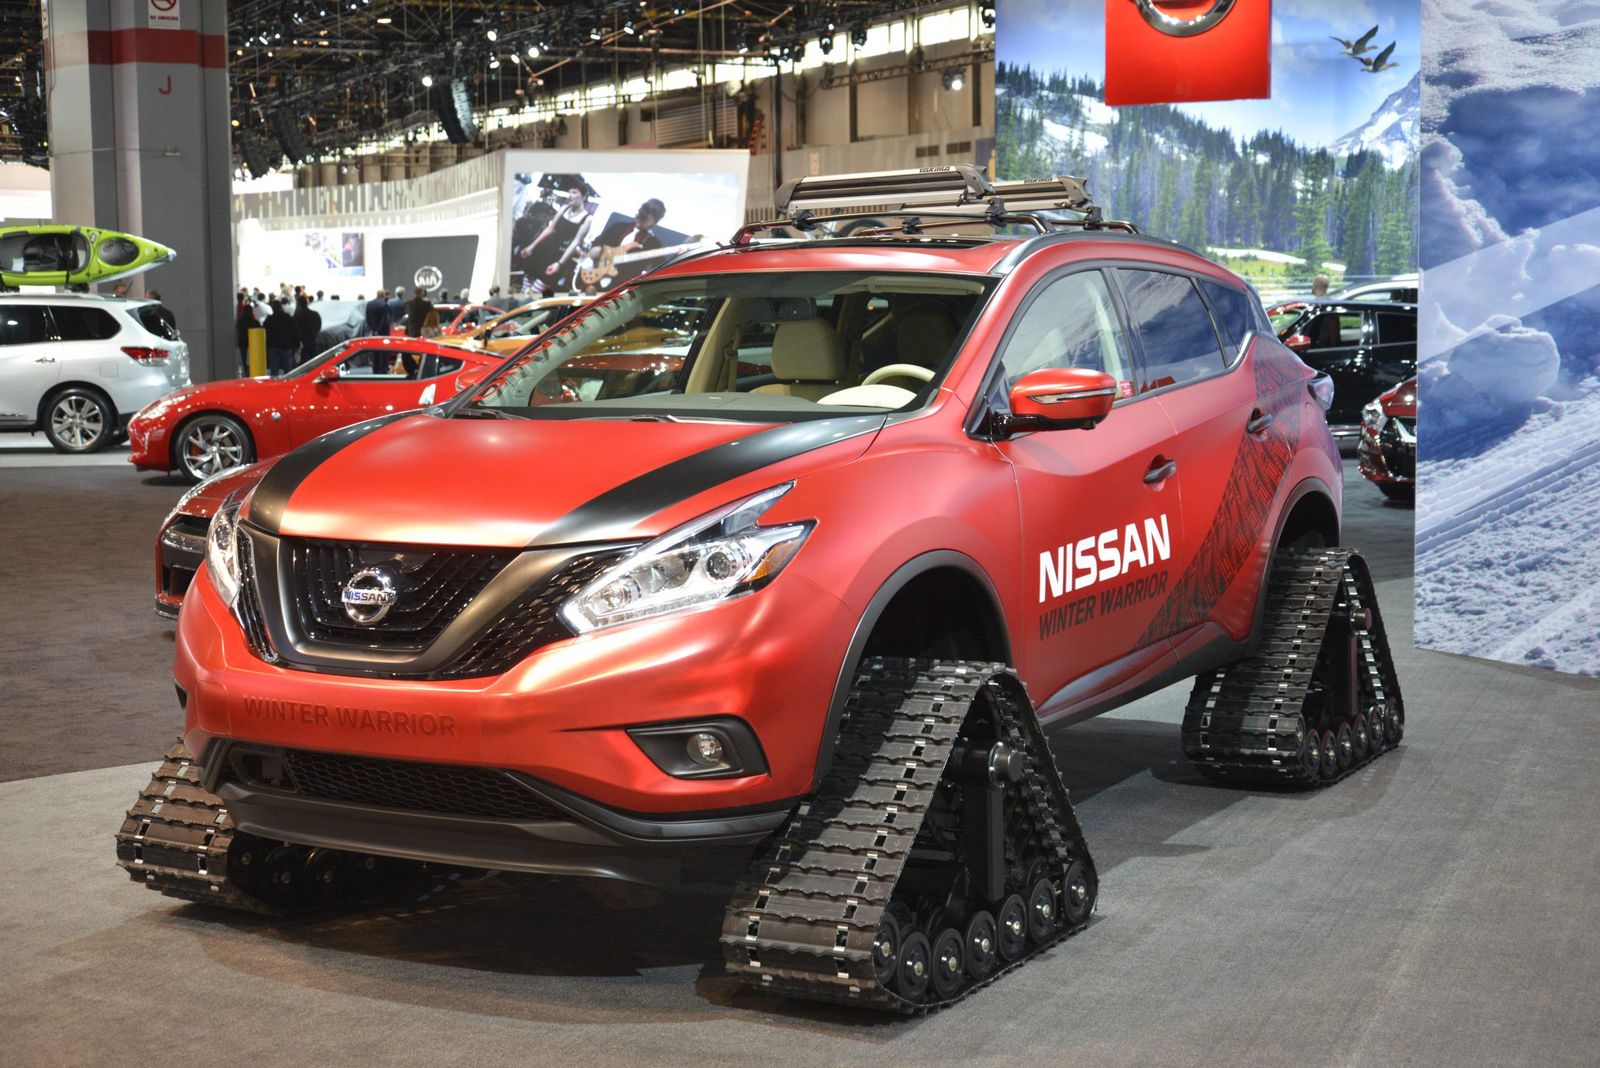 Nissan unleashes trio of aggressive Winter Warrior concepts just in